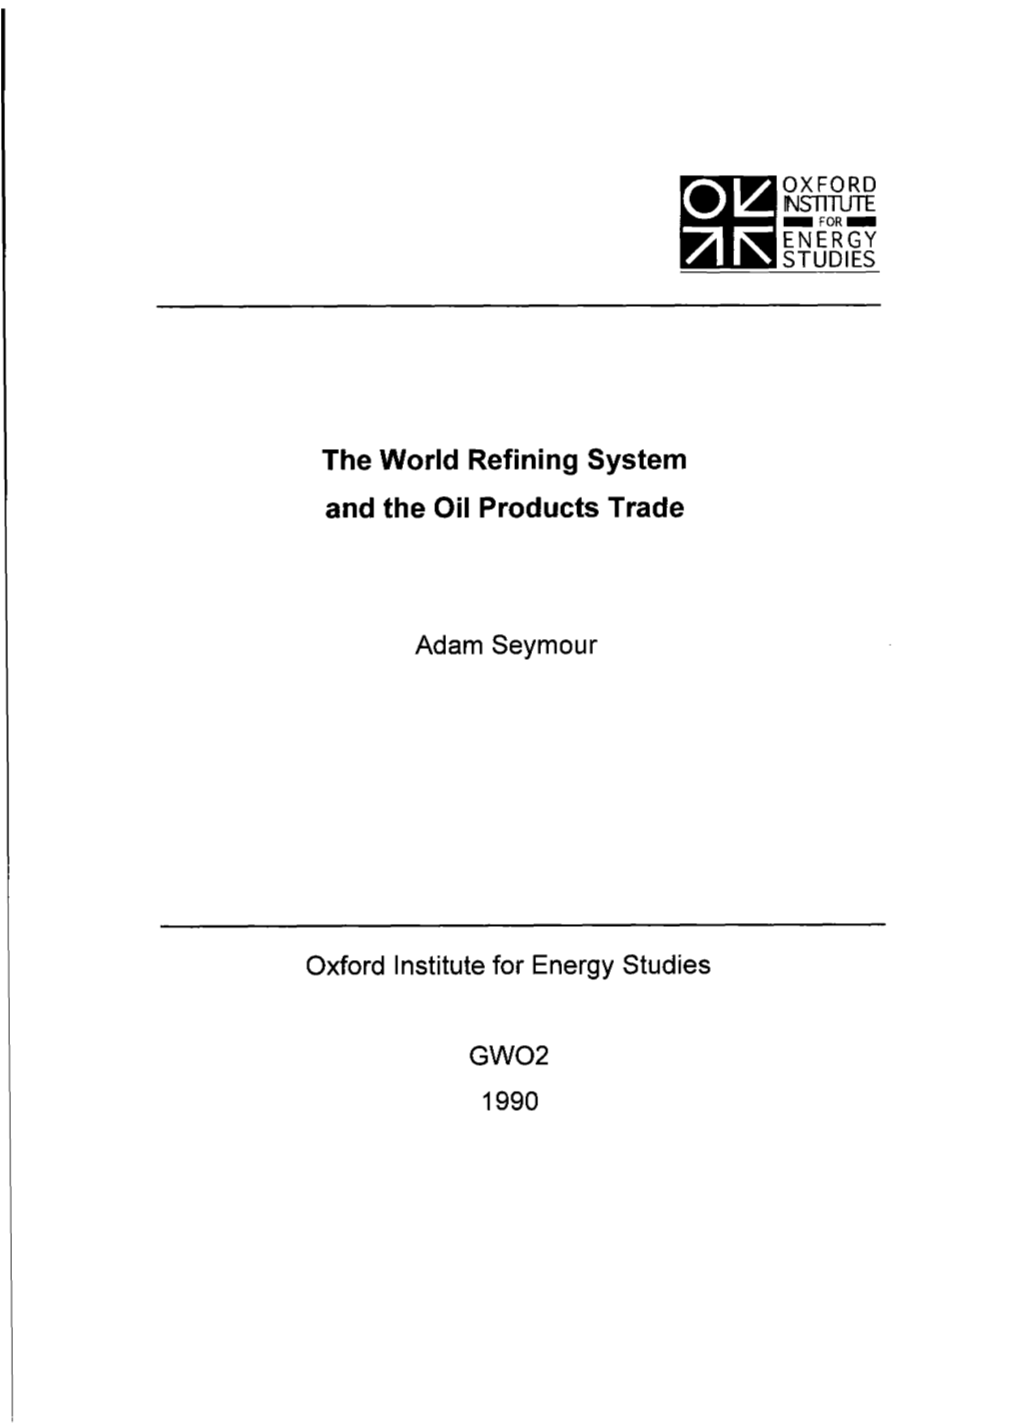 The World Refining System and the Oil Products Trade